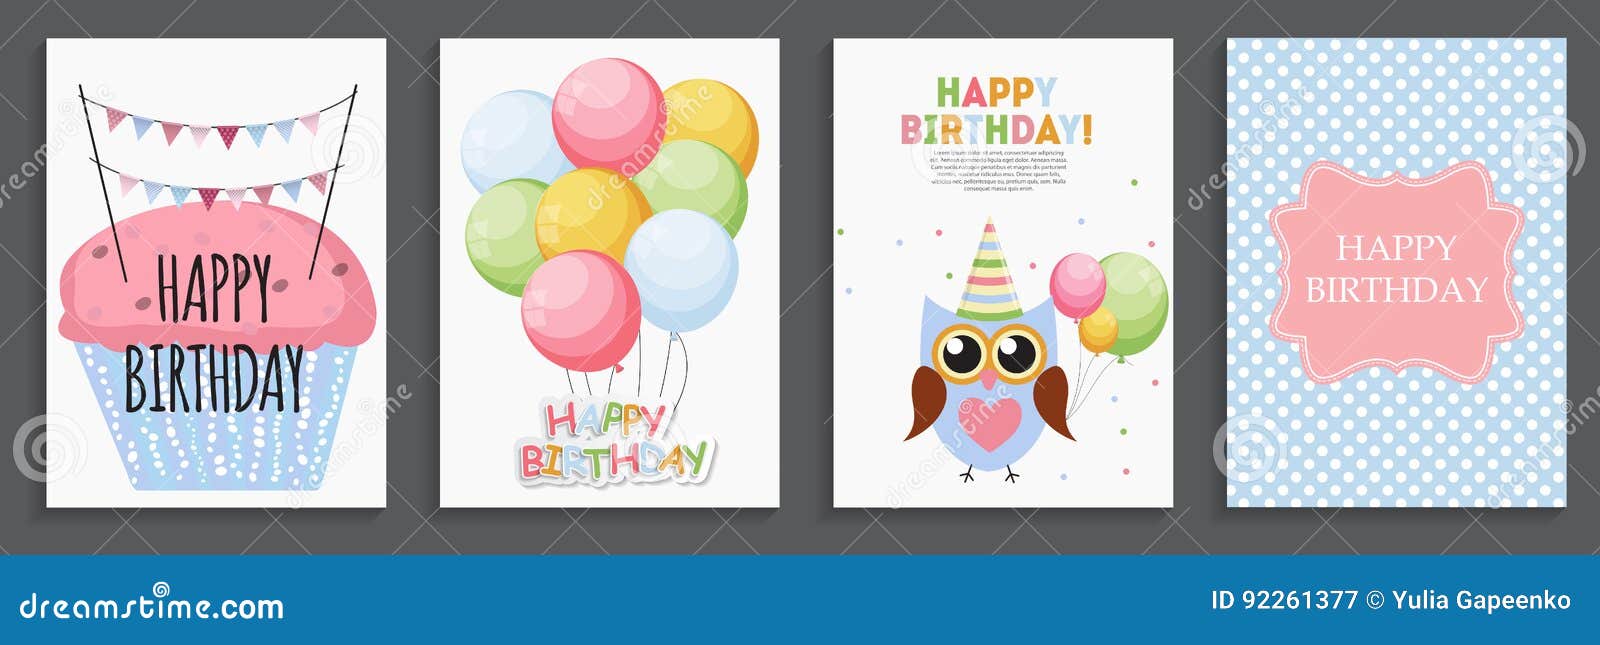 Happy Birthday, Holiday Greeting and Invitation Card Template S Stock ...